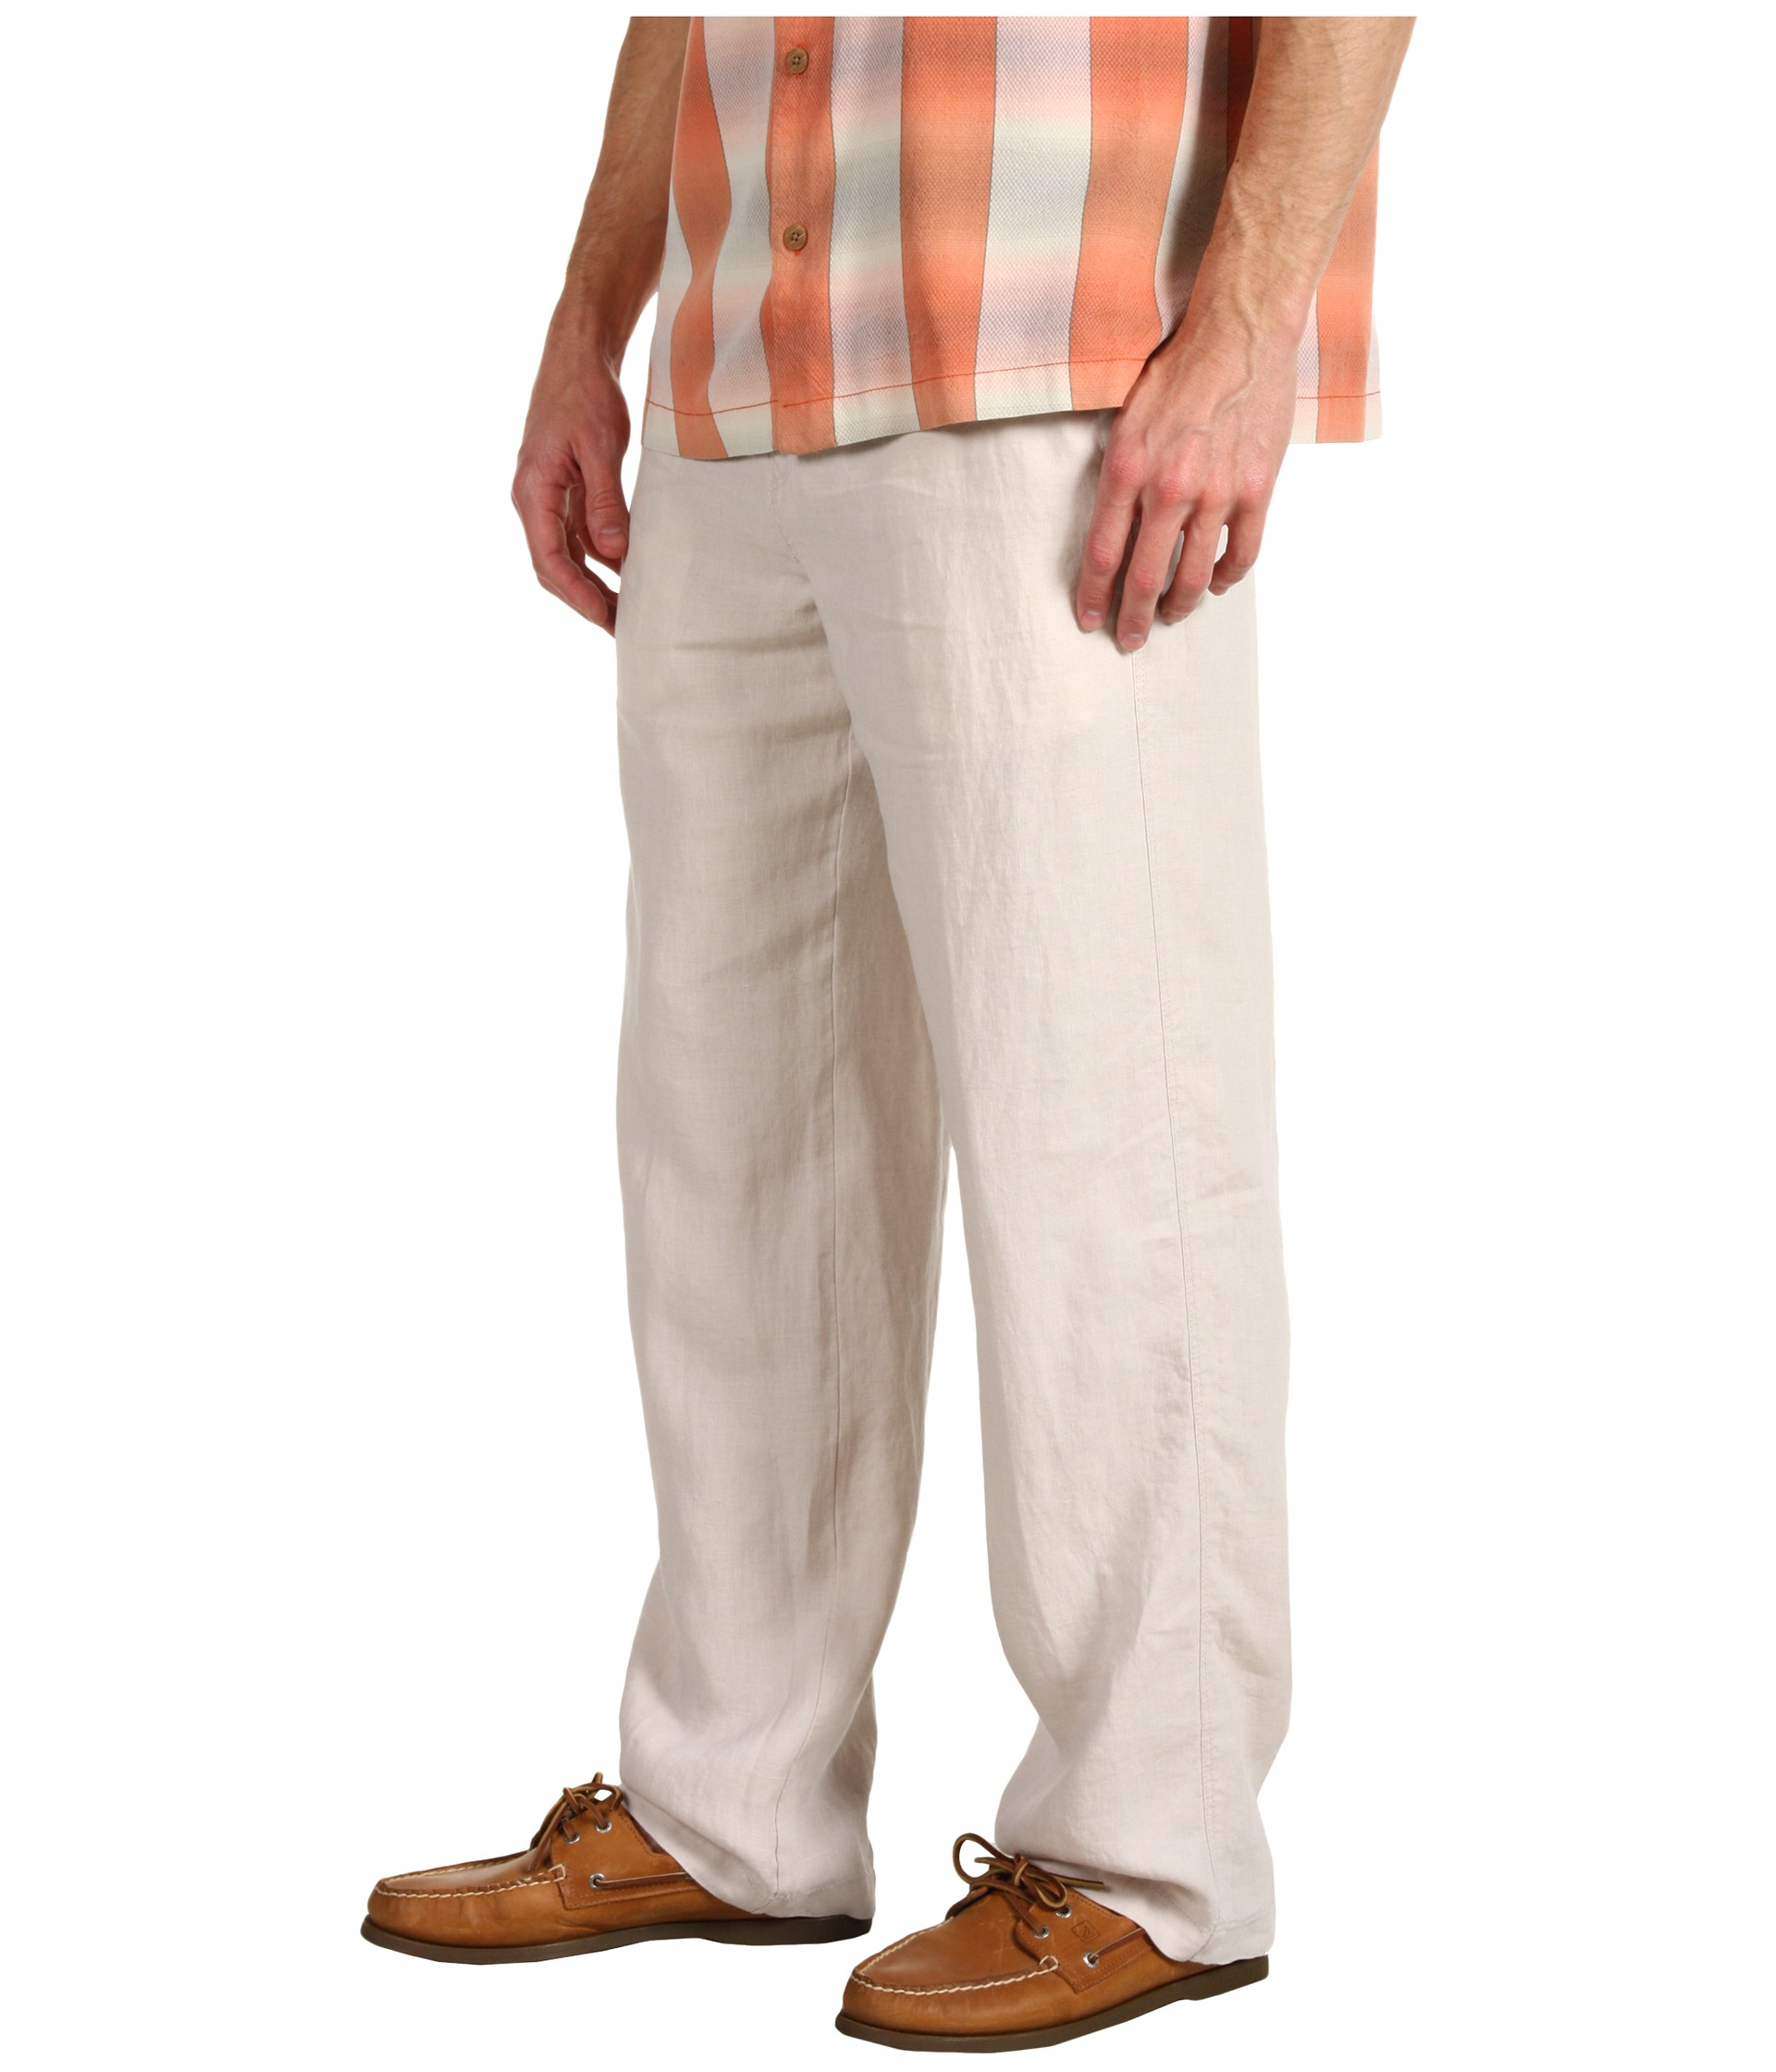 Tommy Bahama Linen On The Beach Pants in Natural for Men - Lyst